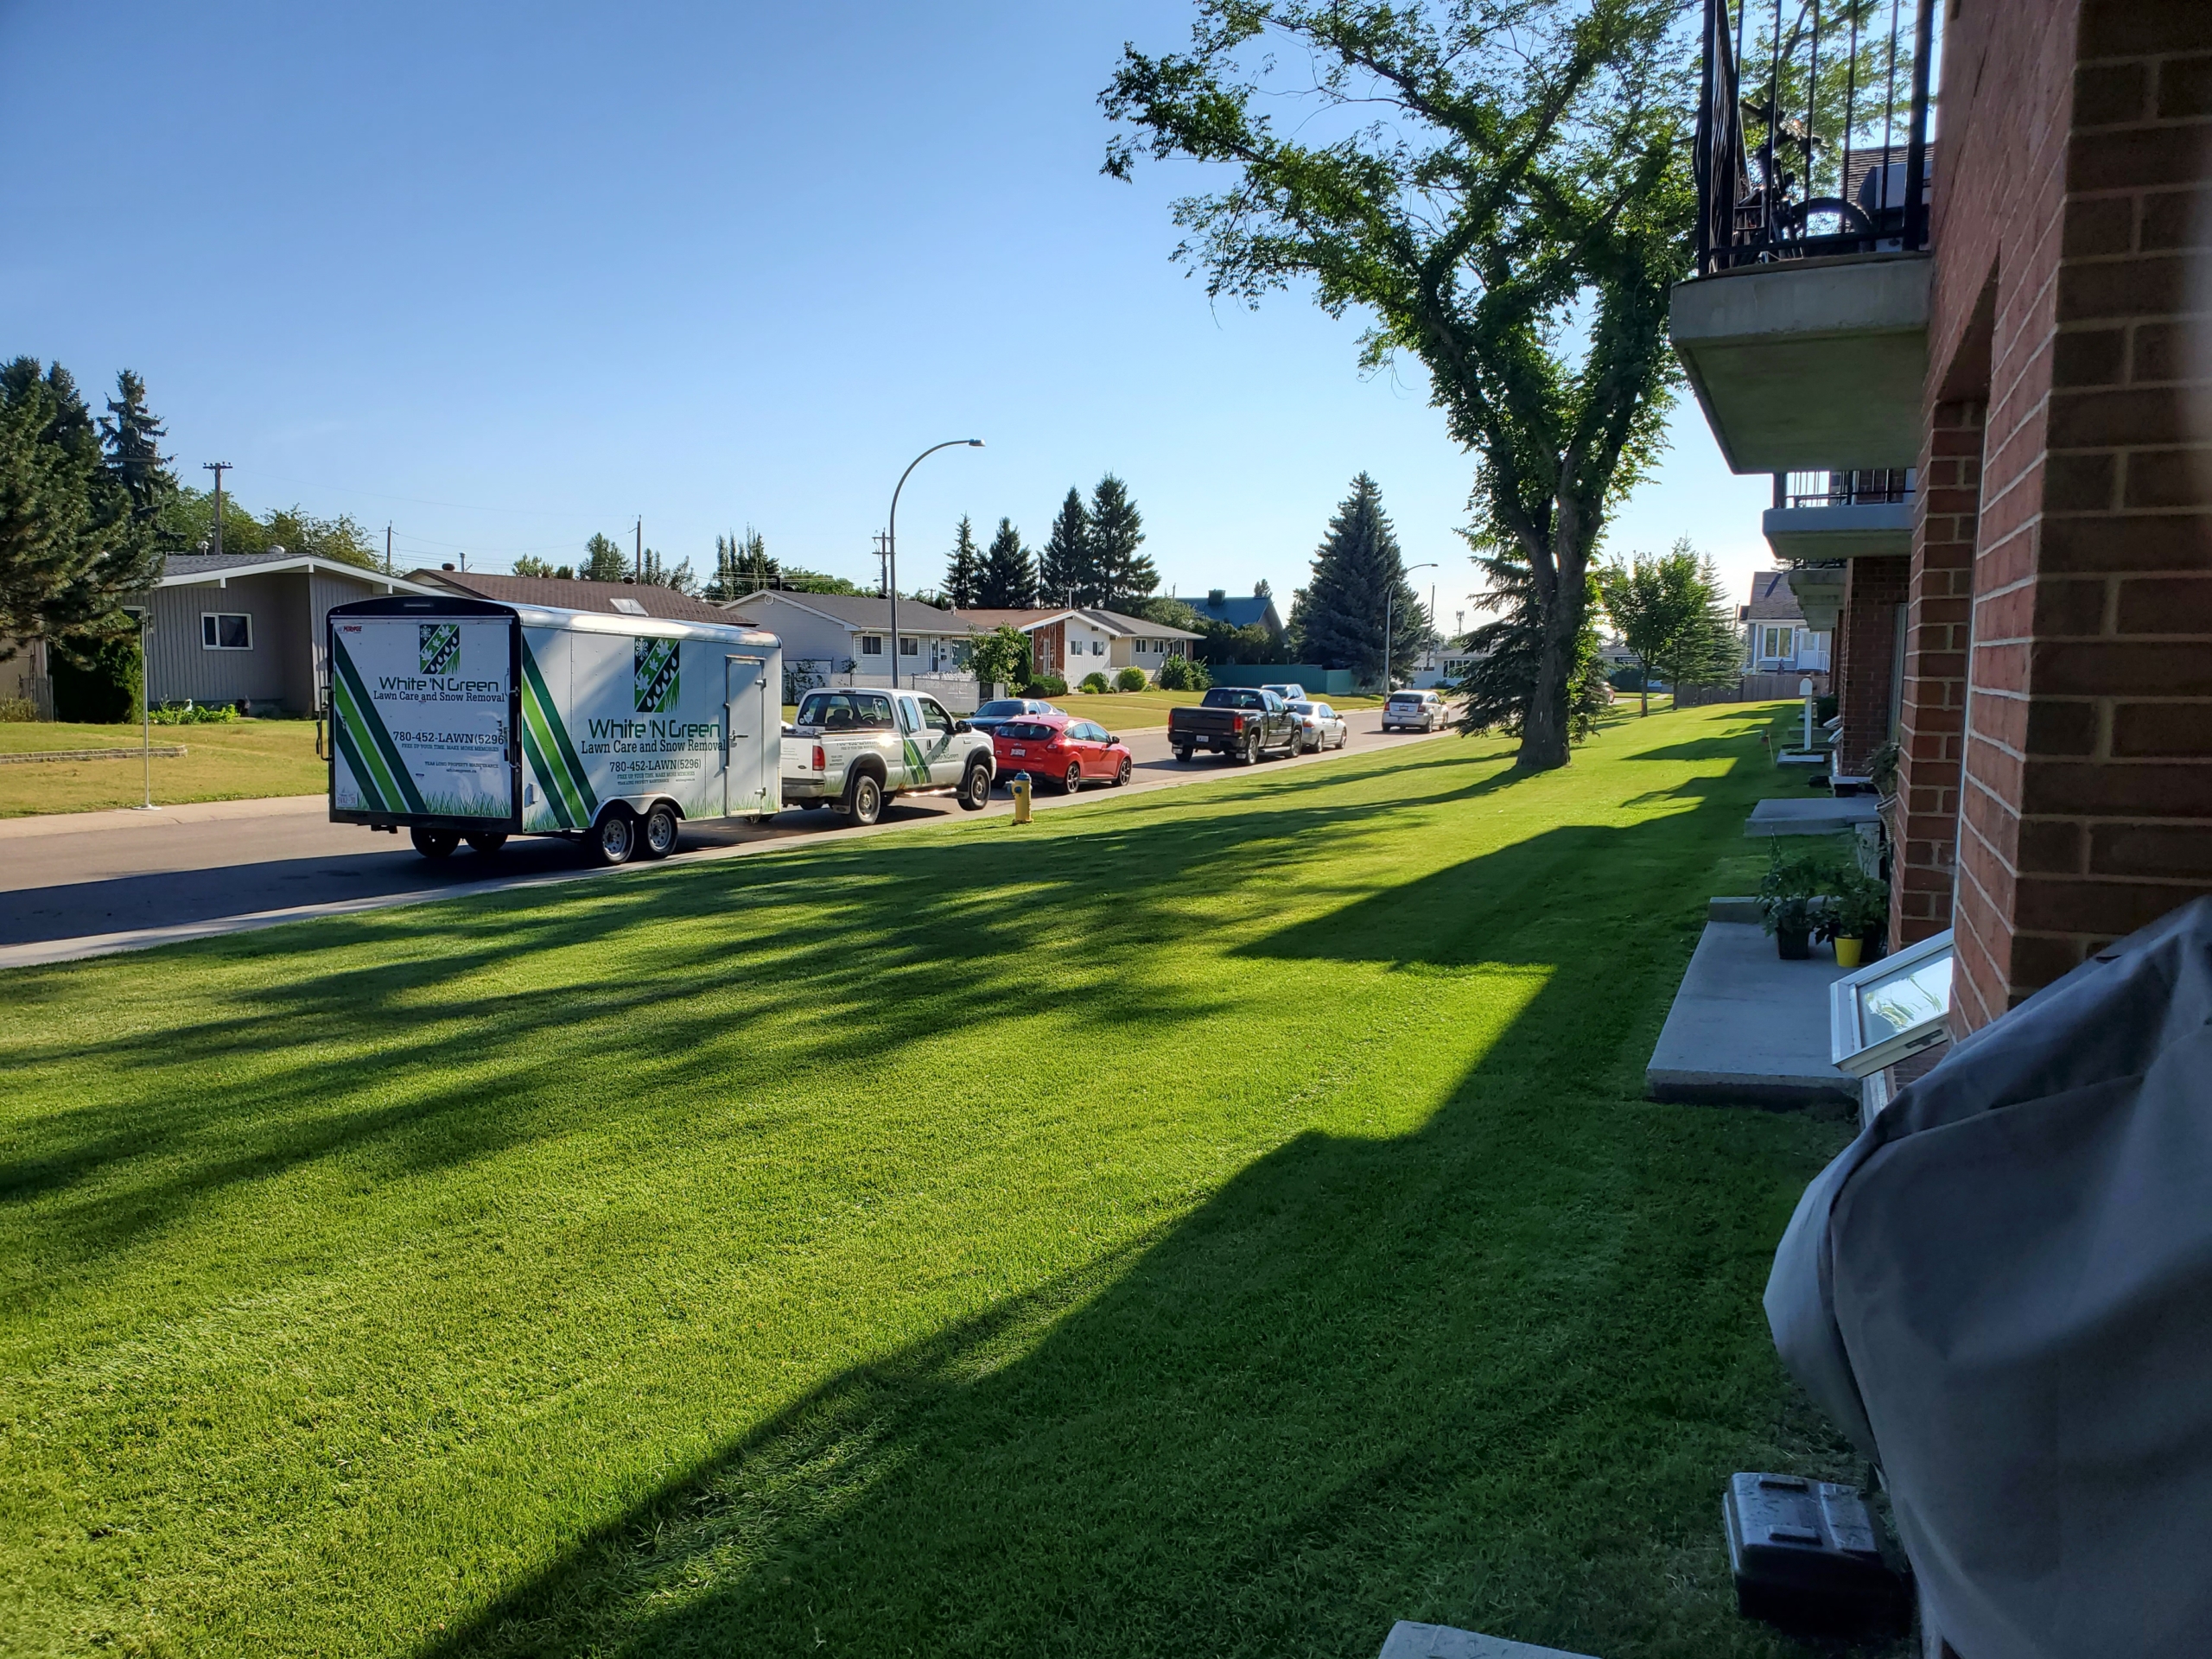 Commercial Lawn Mowing In Edmonton Makes Good First Impressions